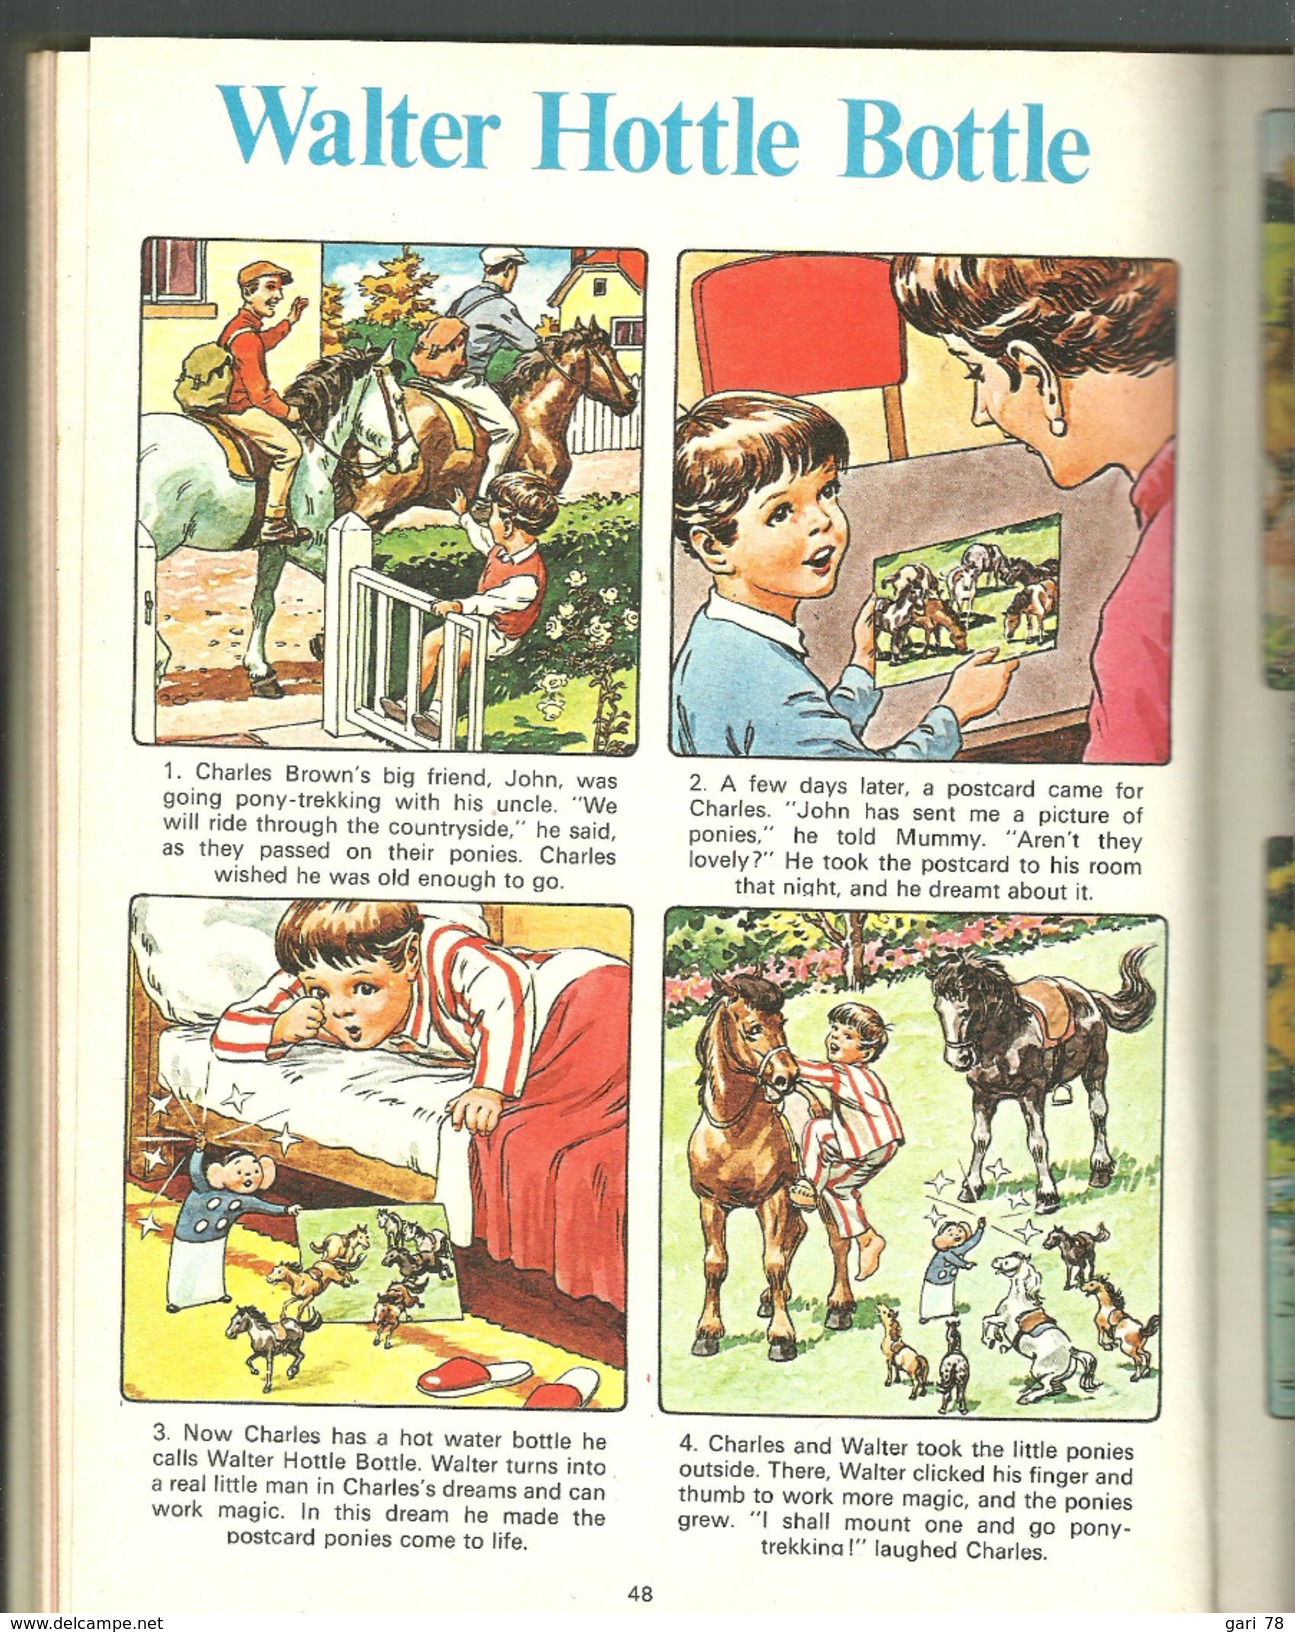 JACK And JILL Book 1977 - Annuels